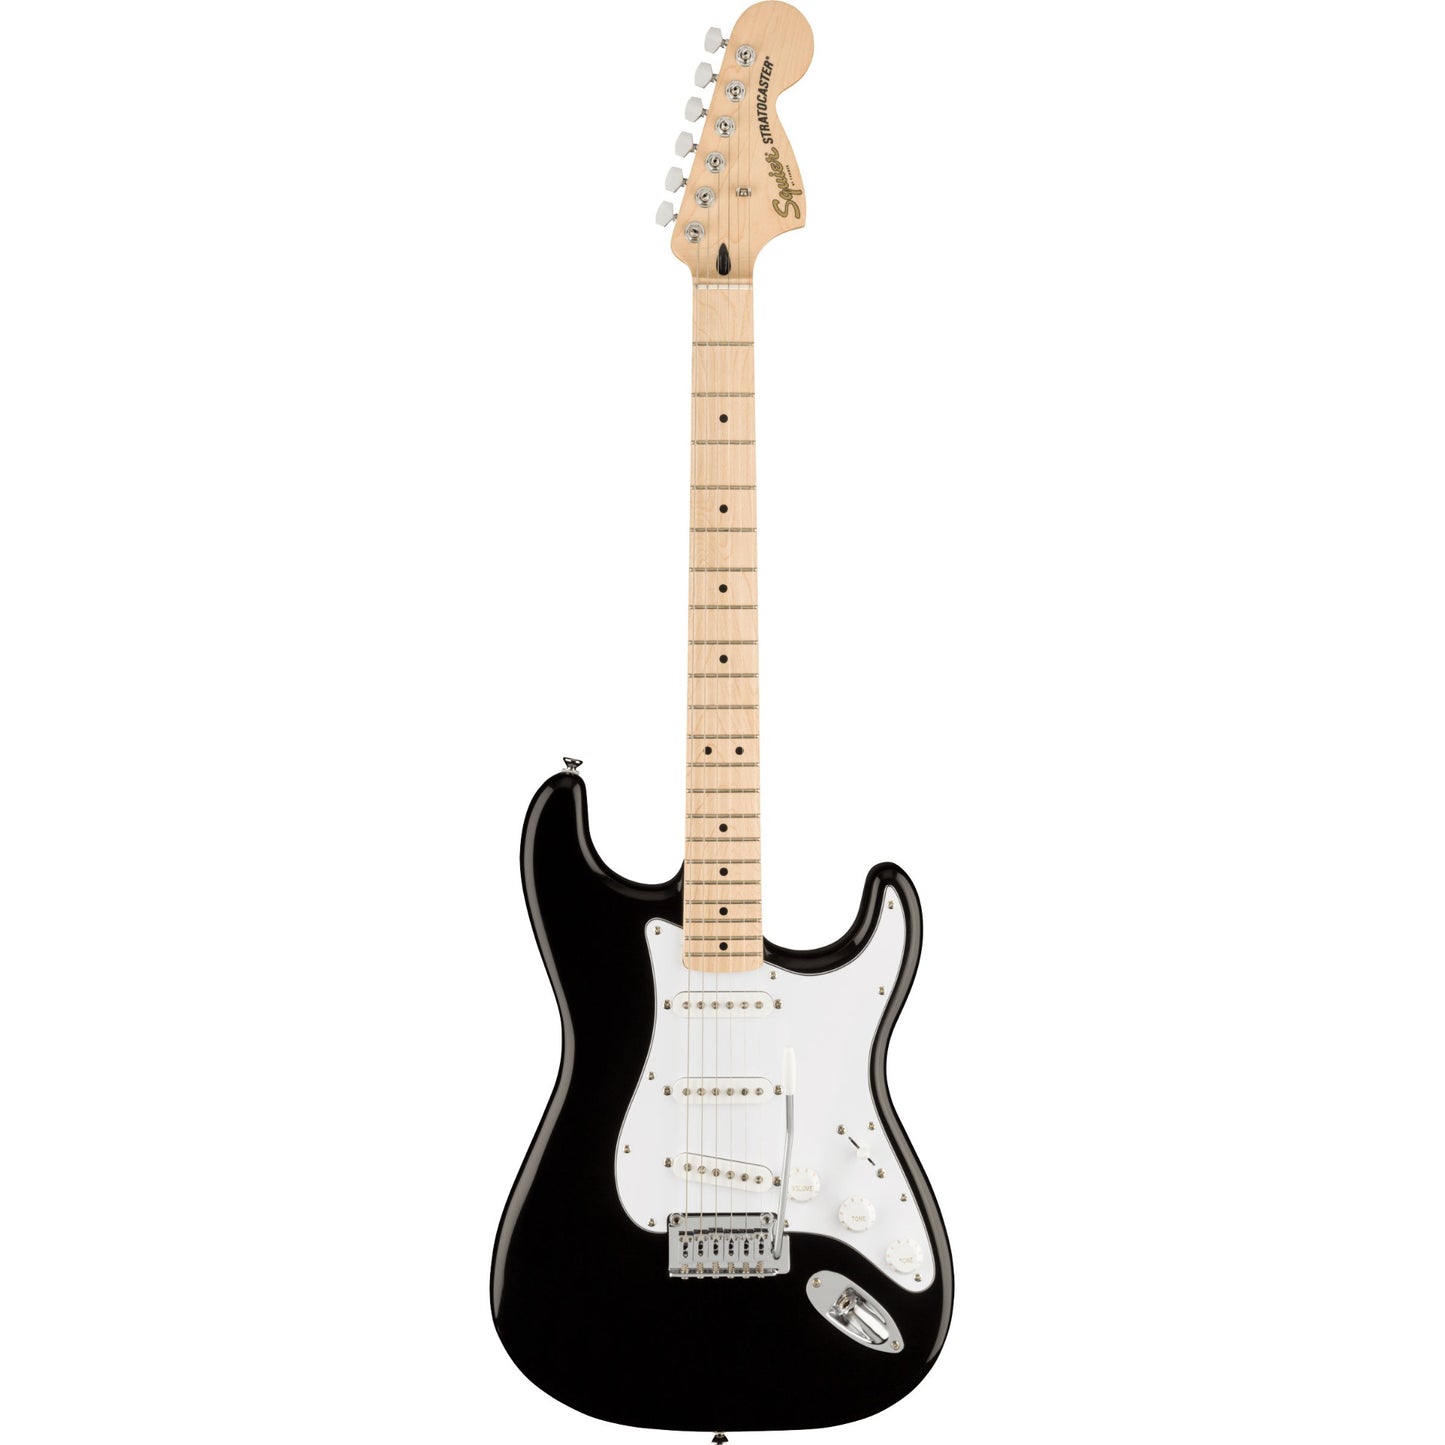 Squier Affinity Series Stratocaster Electric Guitar, Black